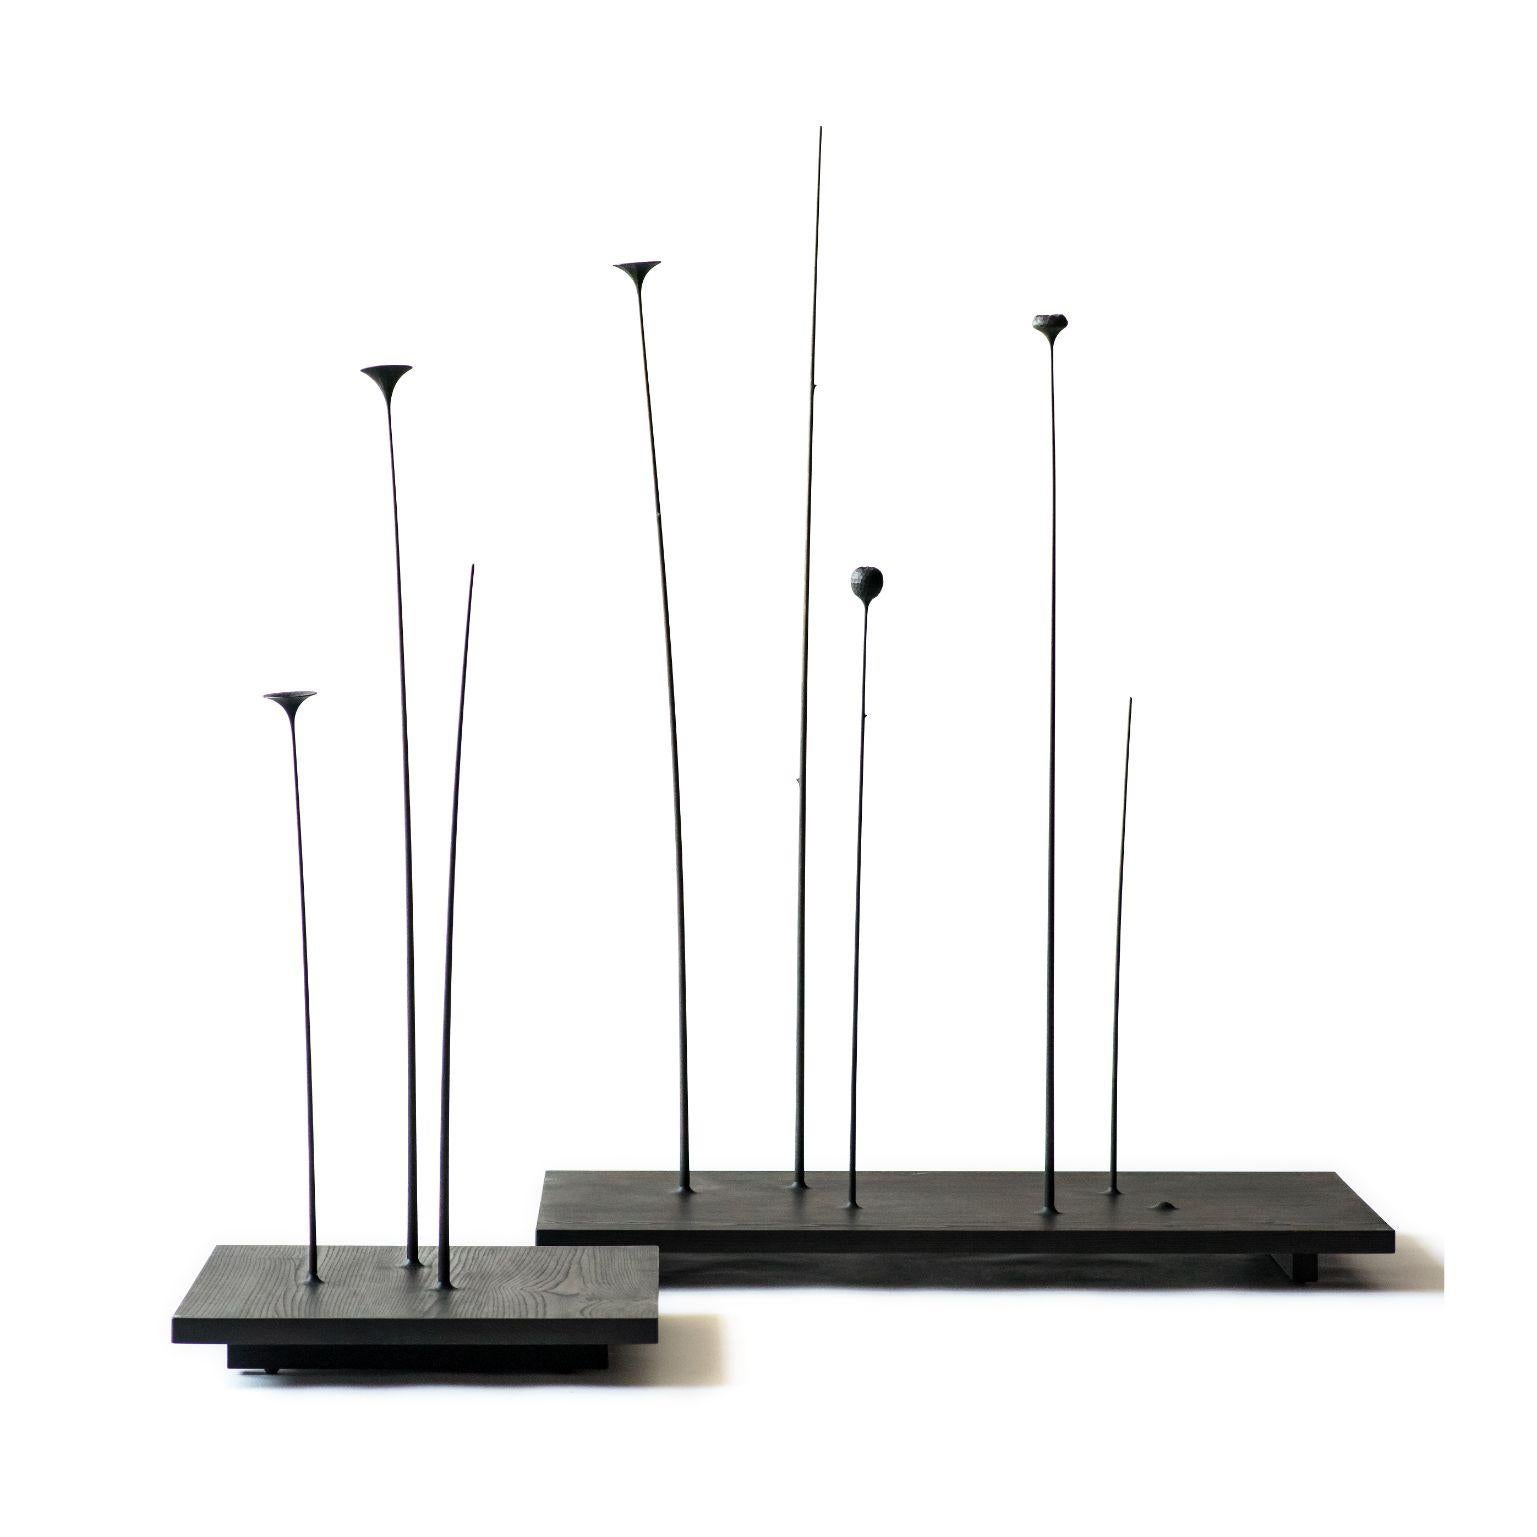 Set of 2 fiori sculptures by Antrei Hartikainen
Materials: Flowers (Linden wood), baseplate (Ash/maple)
Dimensions: W 120 x D 60 x H 150 - 170 cm, W 60 x D 60 x H 150 - 170 cm

The Fiori sculpture composes of slender-stemmed wooden flowers,